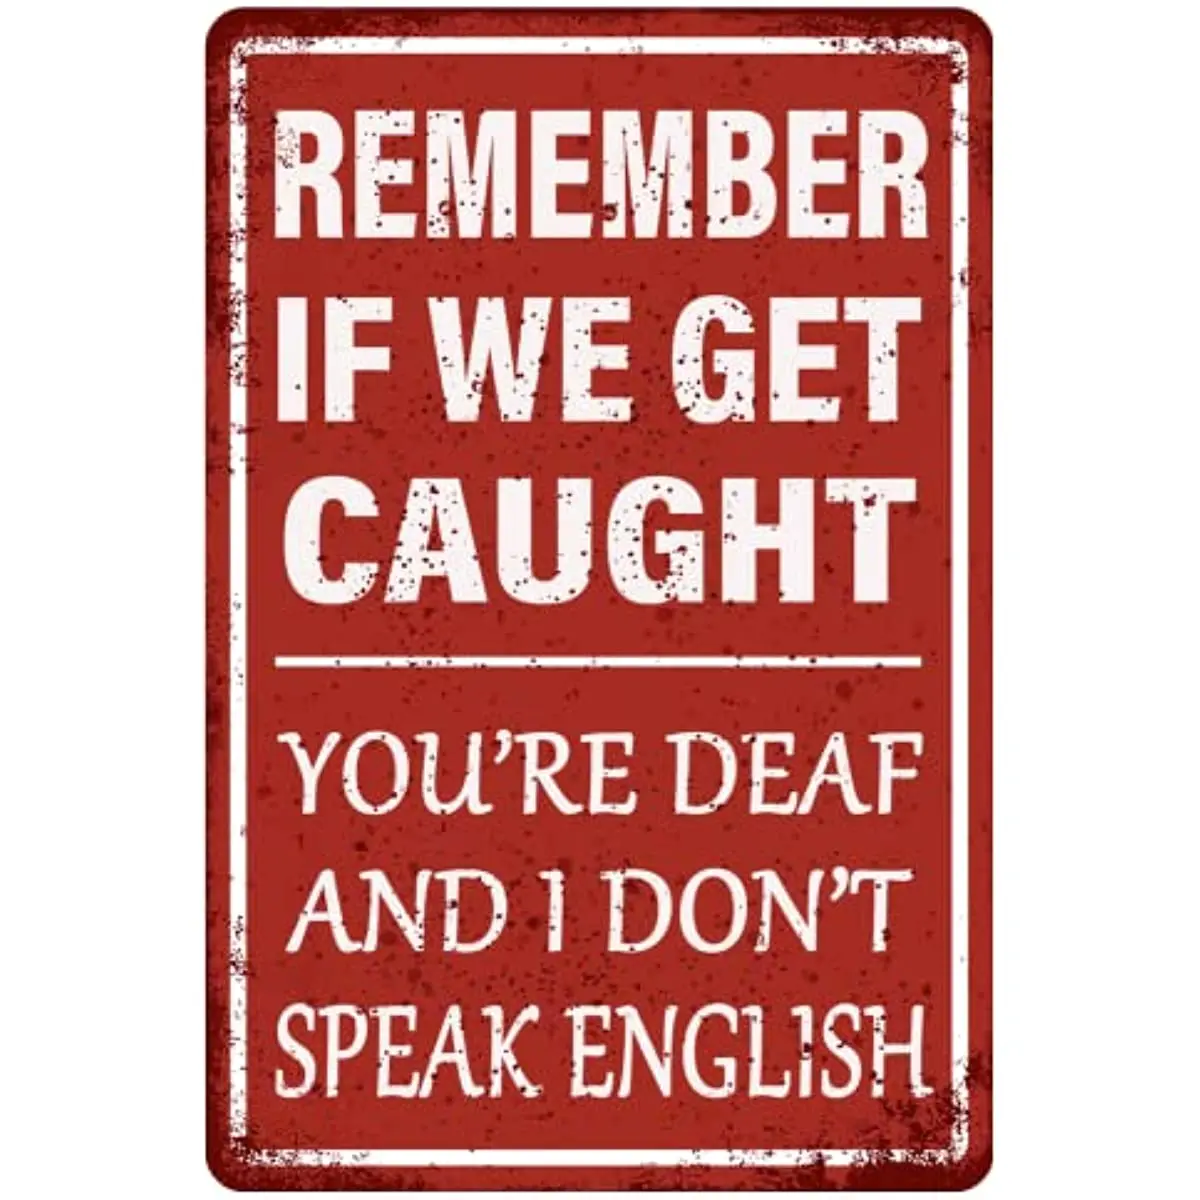 

Metal Speak Caught Humor And Funny We If English, Garage Man Remember Get Sign You're Tin Signs, Cave Deaf Bar Decor Don't